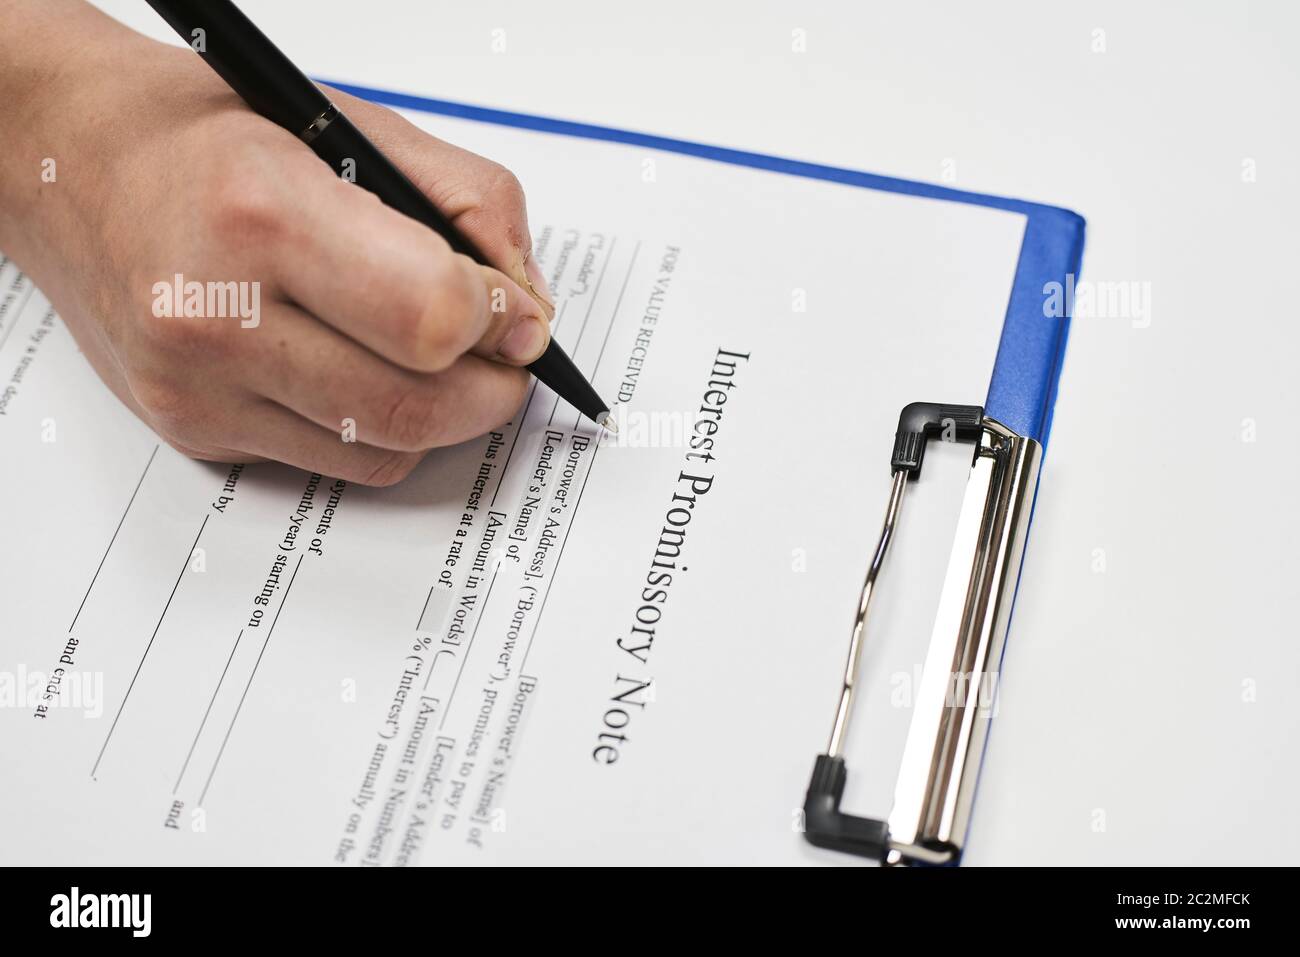 Filling and signing Interest Promissory Note document Stock Photo